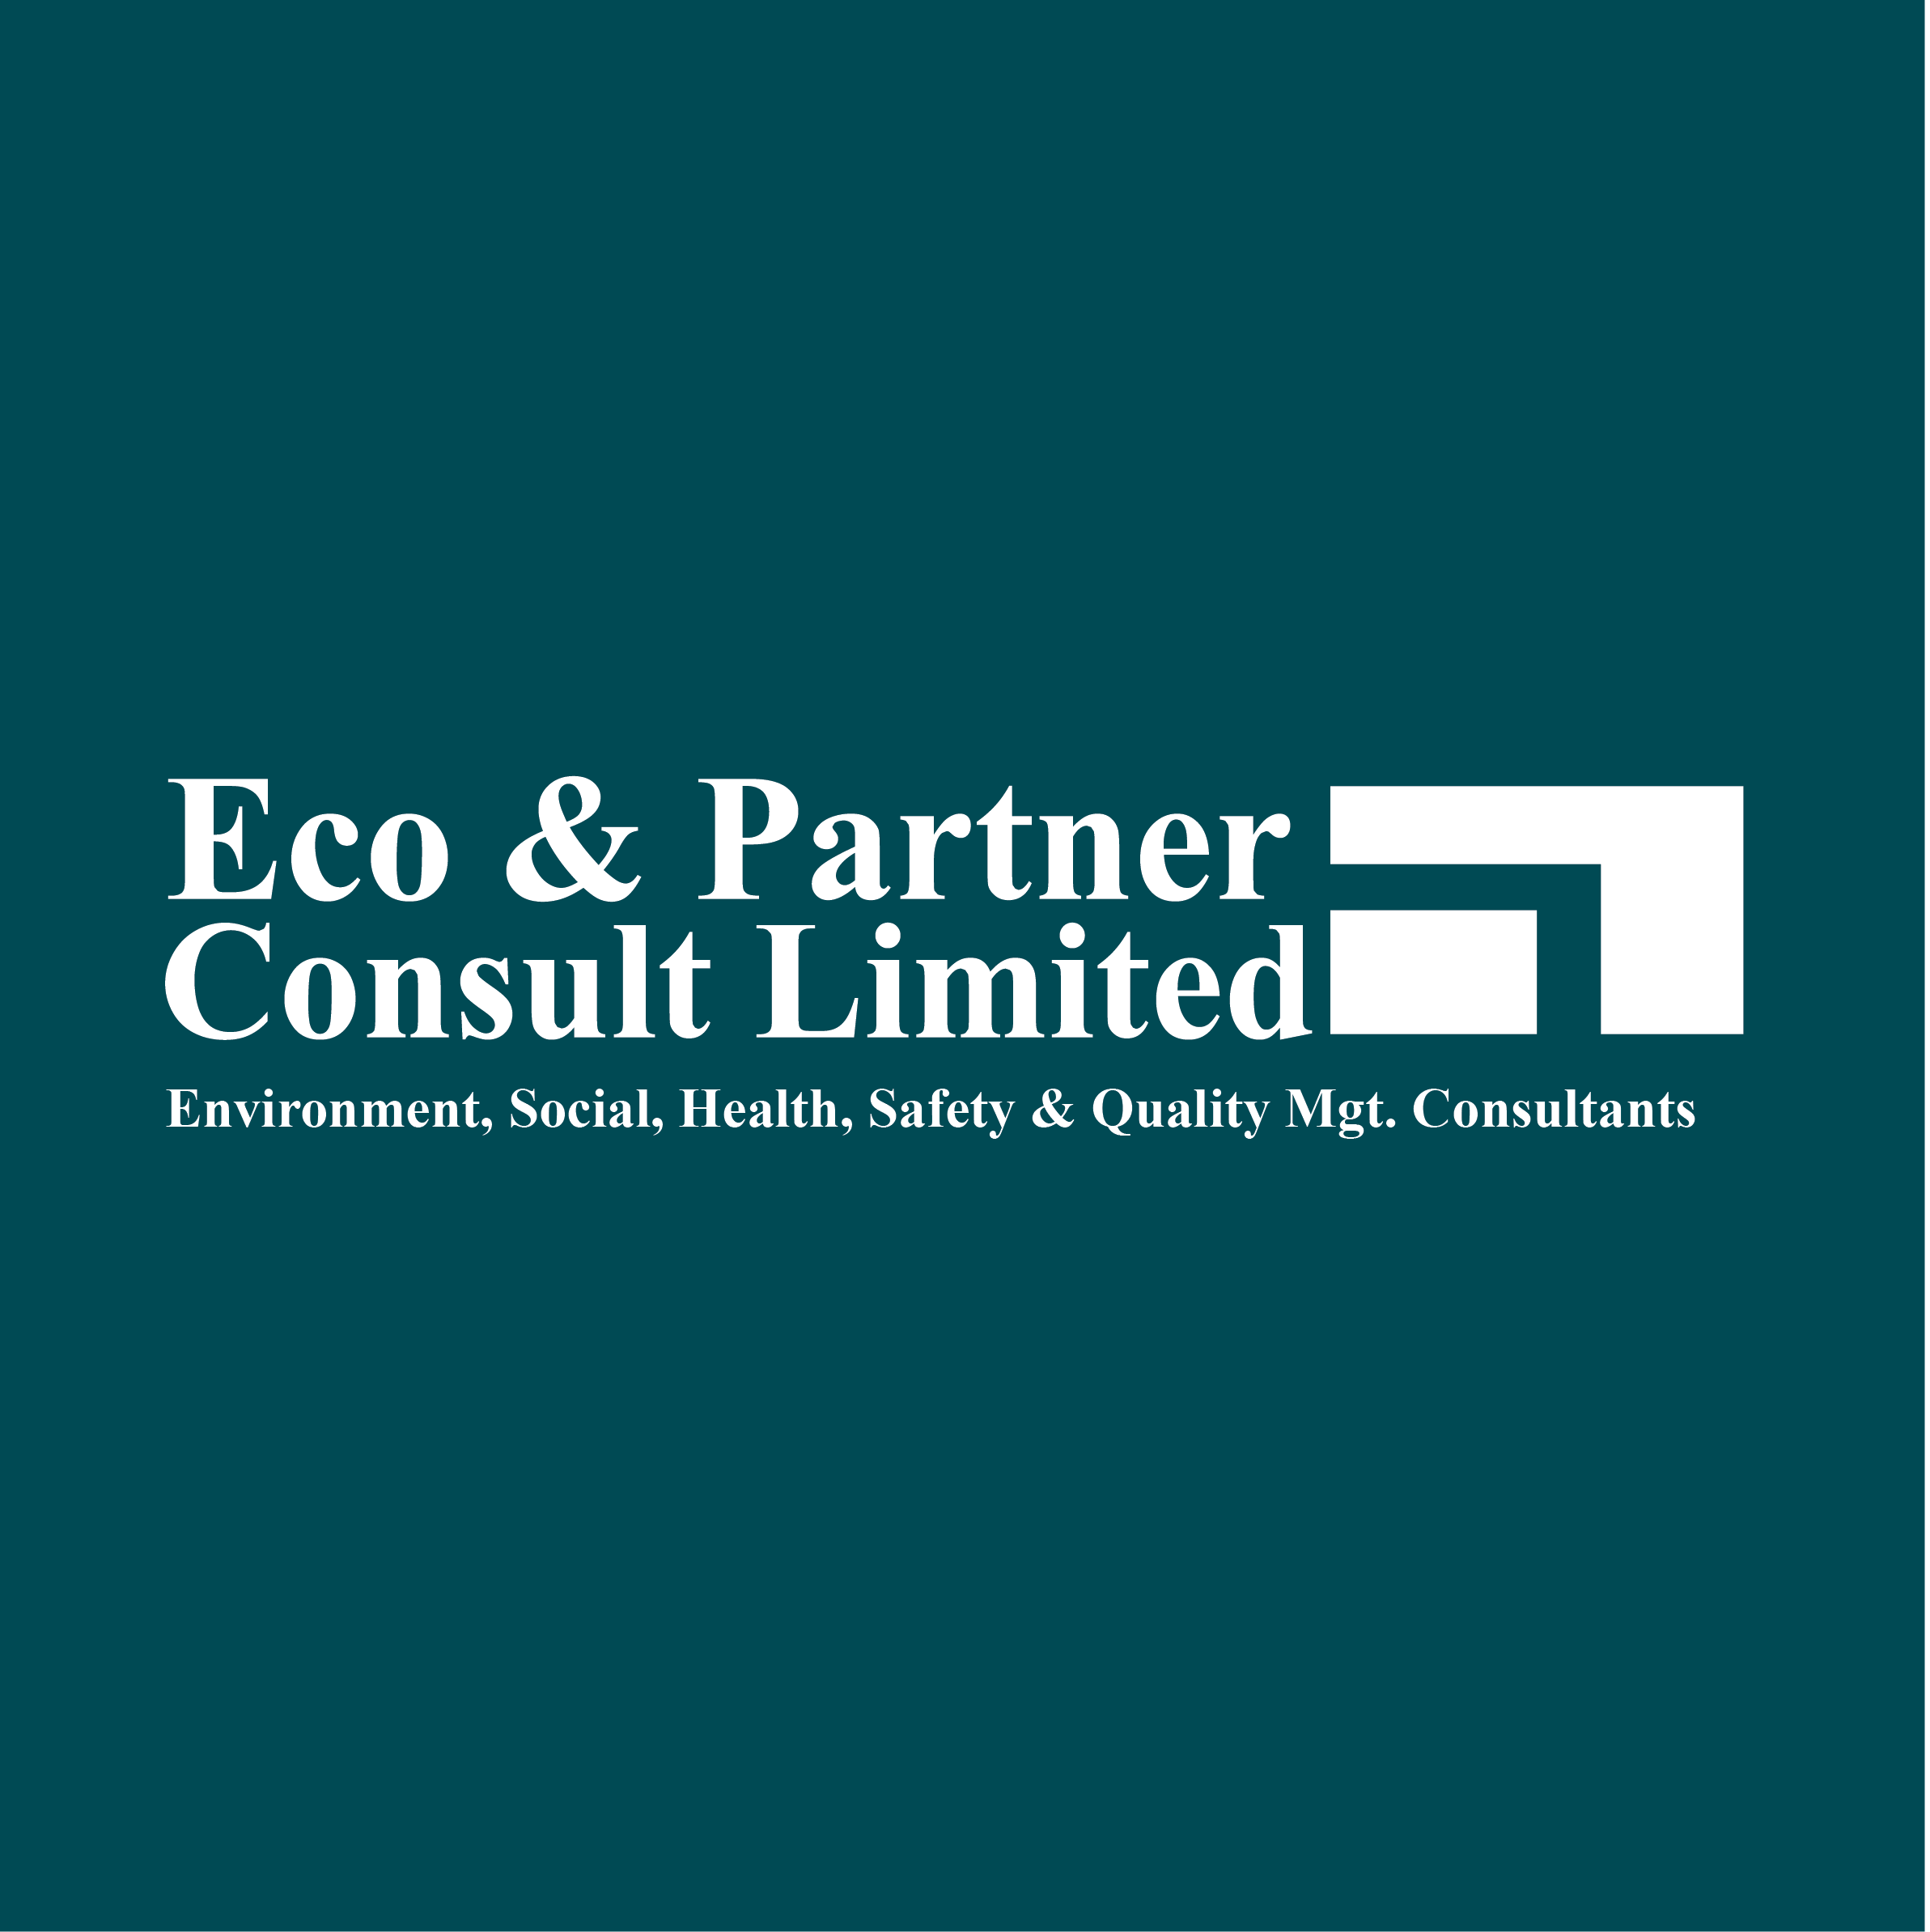 Eco & Partner Consult Limited